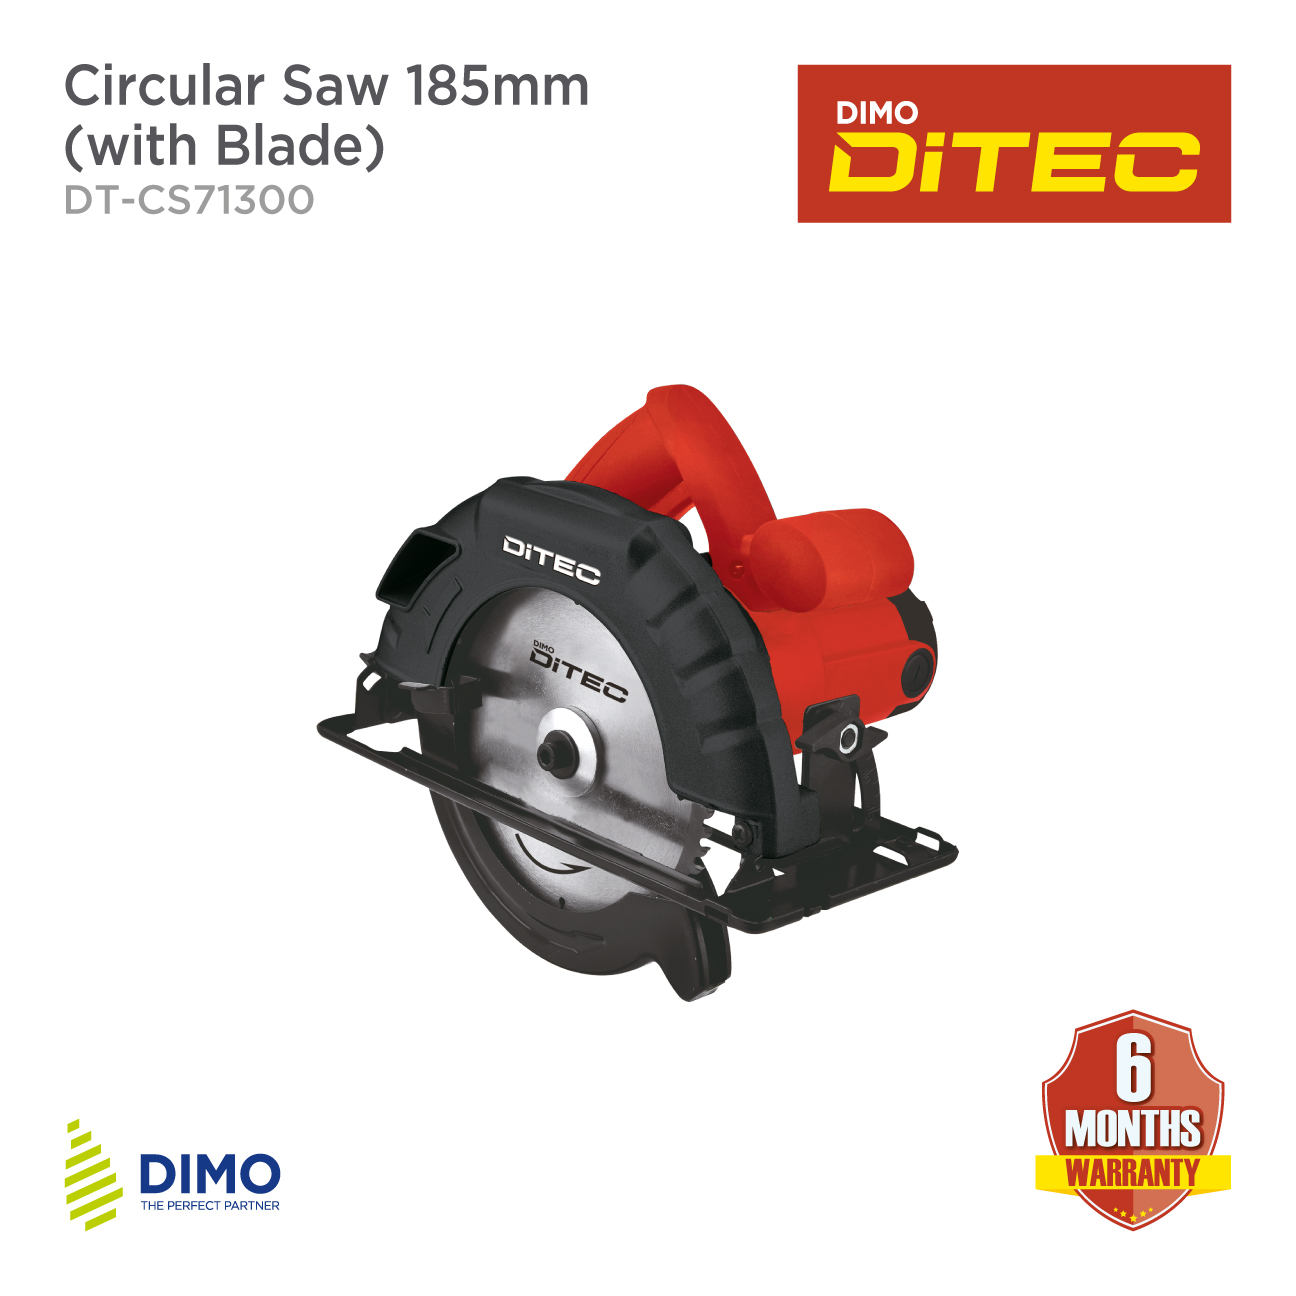 Circular-Saw-185mm-(with-Blade)